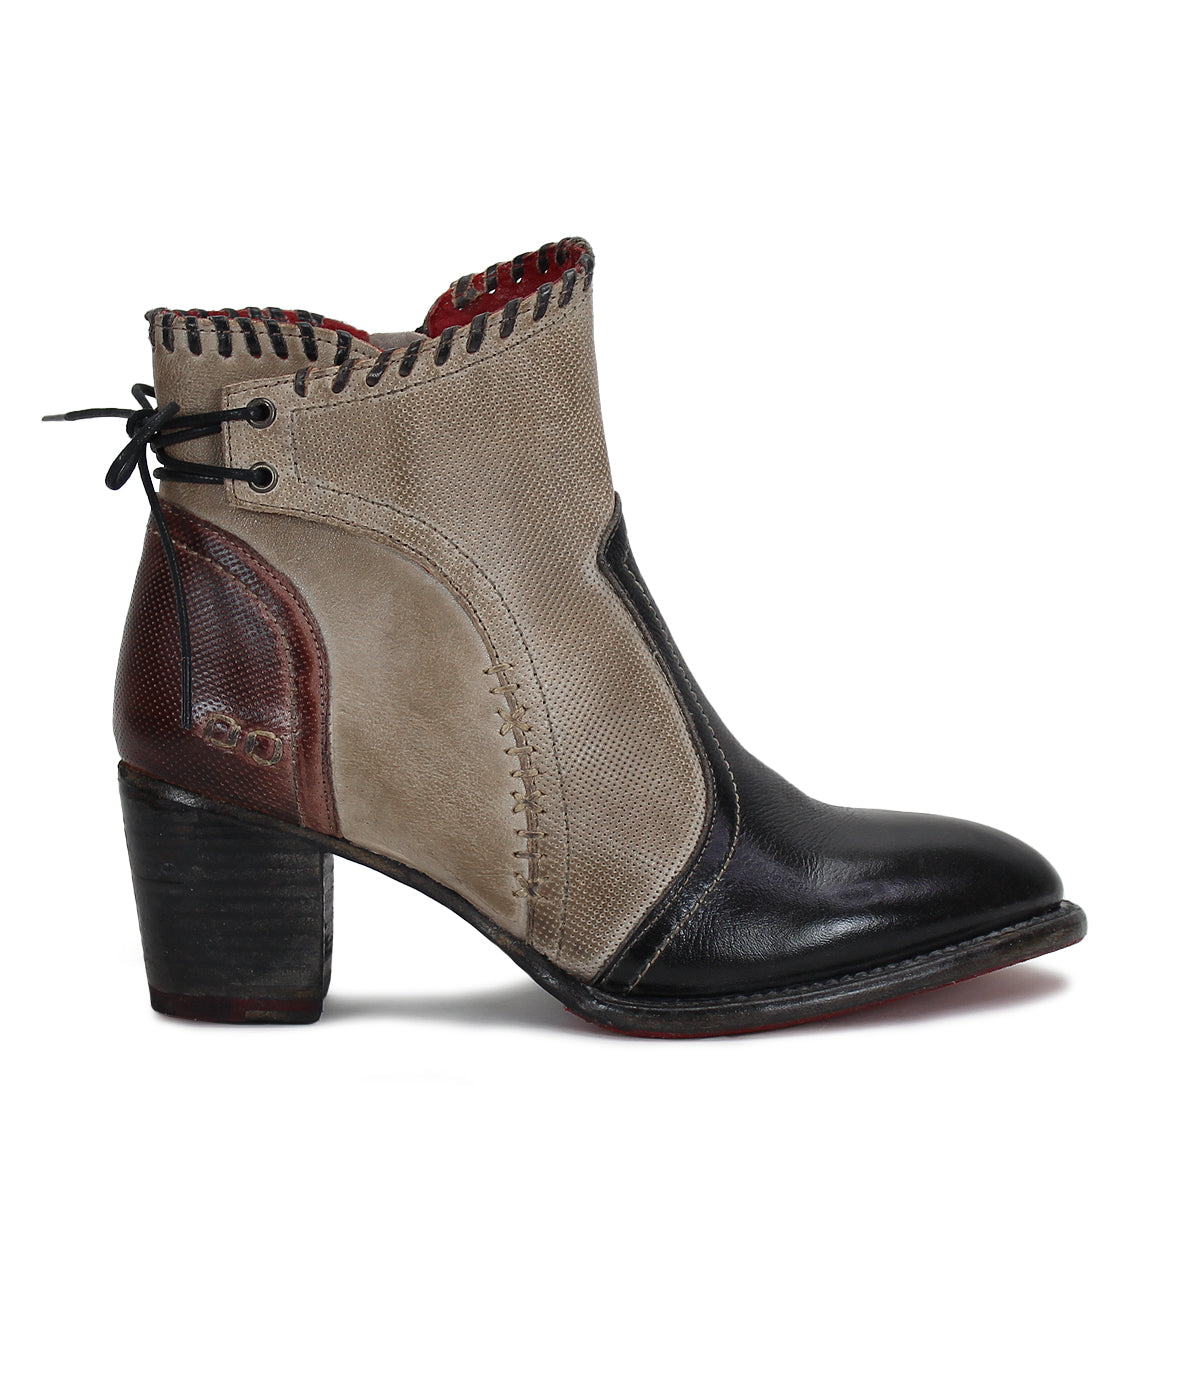 A women's Bia ankle boot in beige and black by Bed Stu.